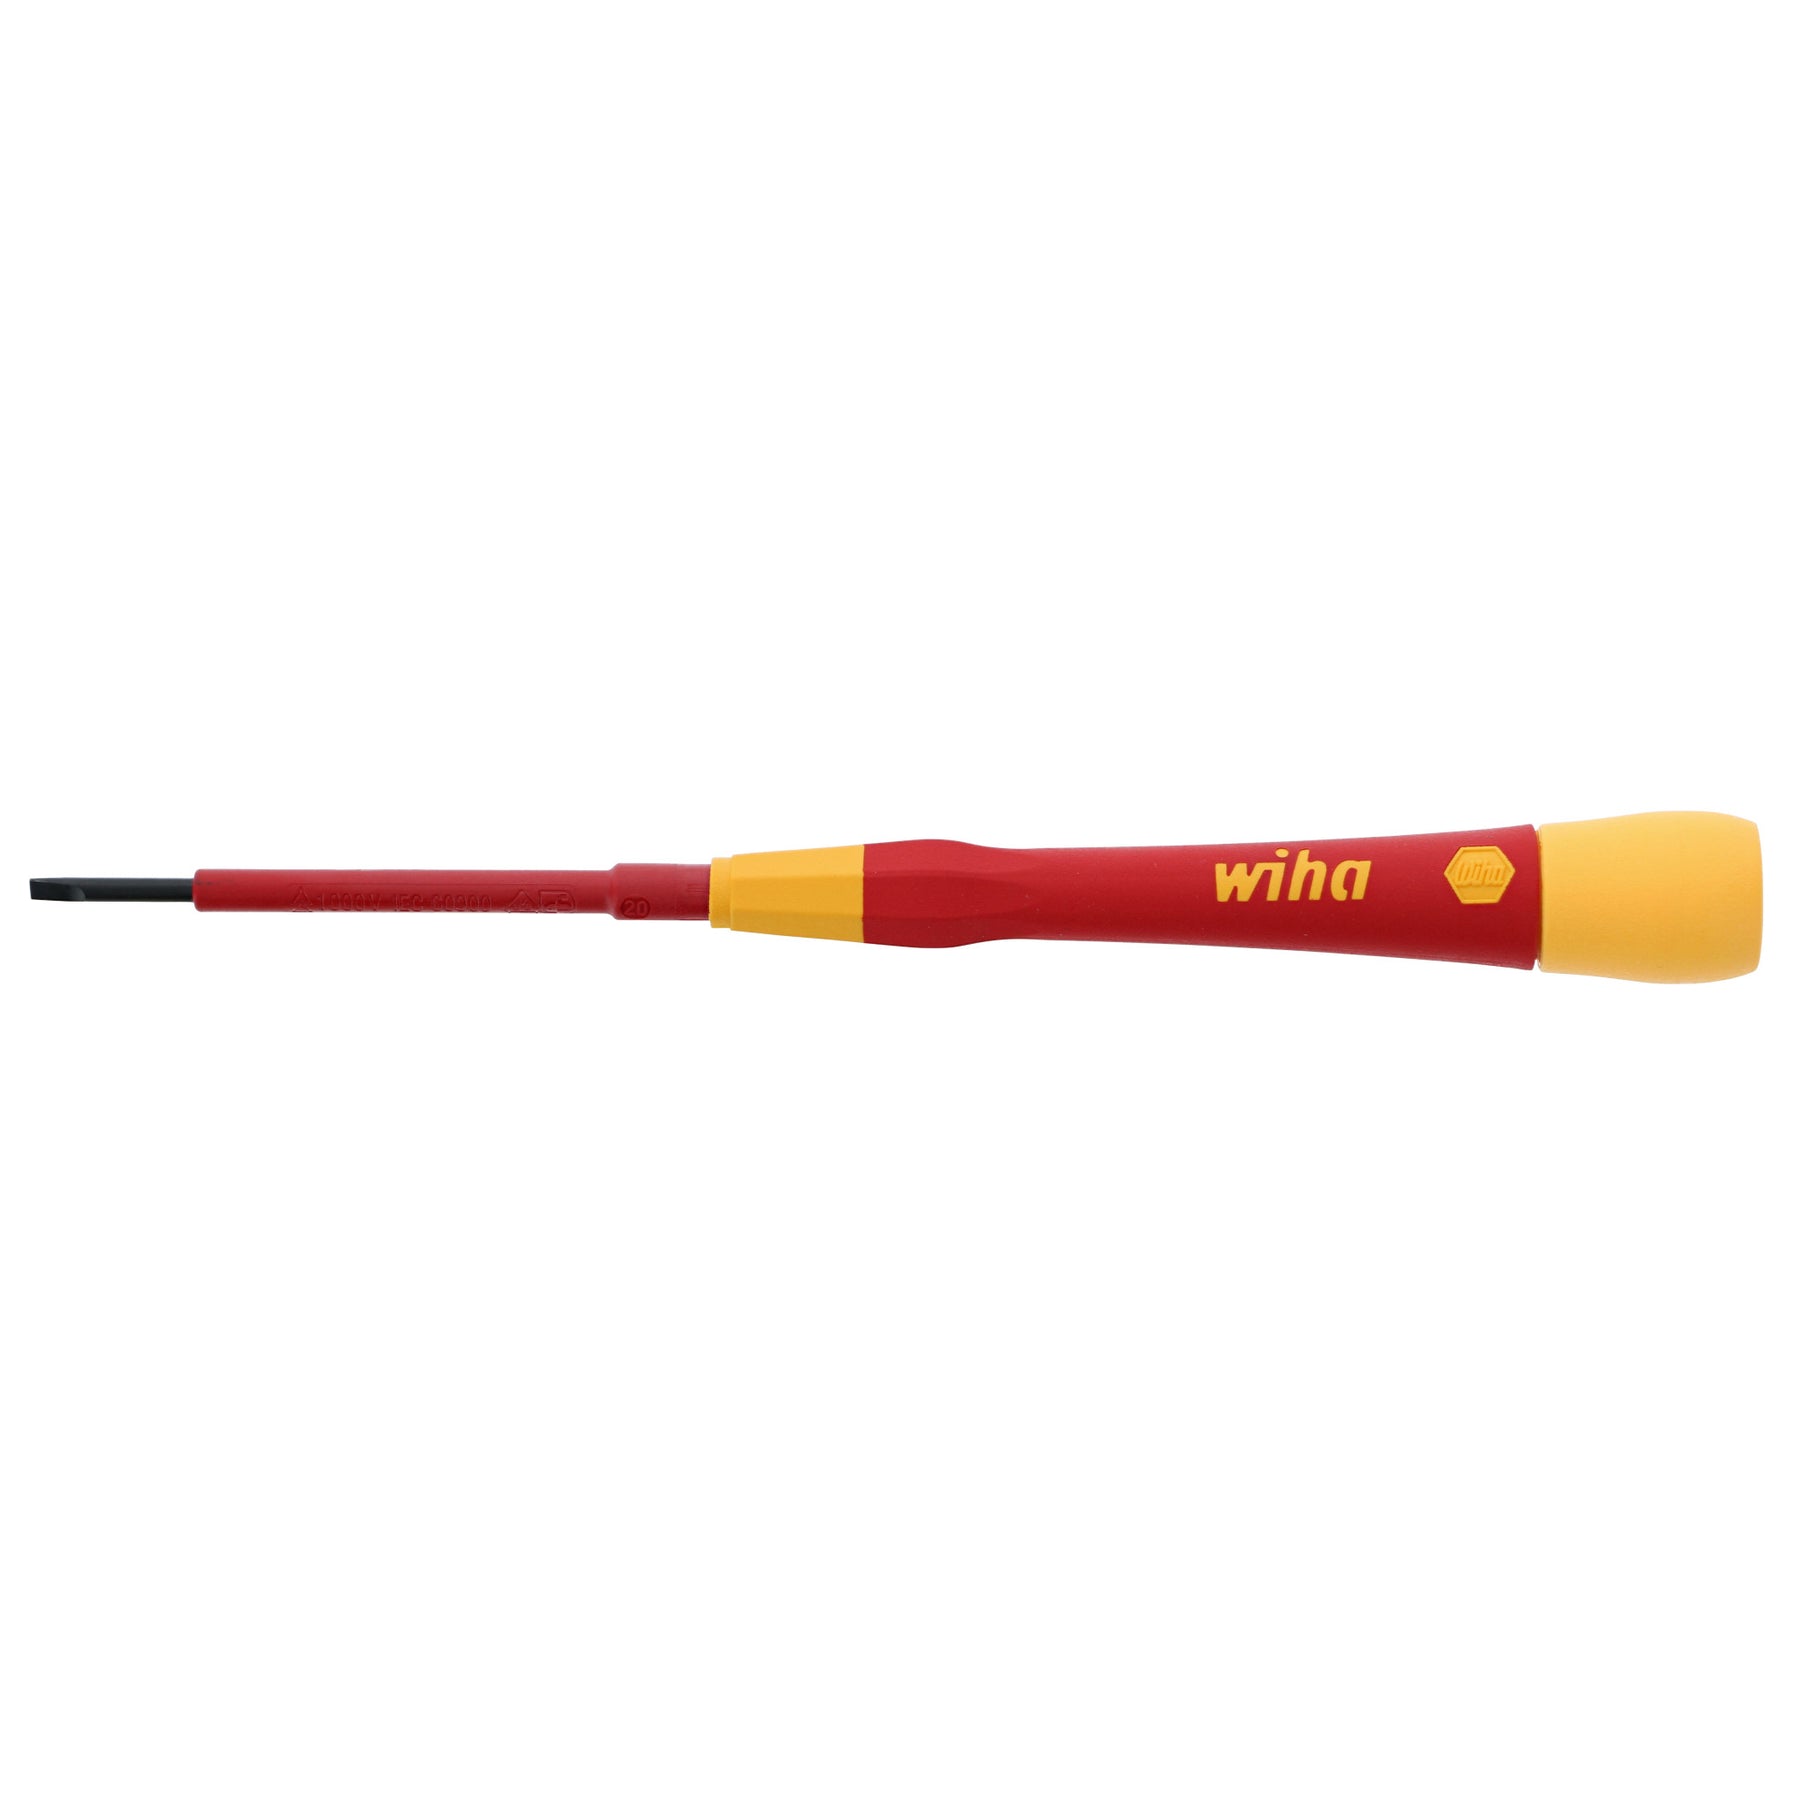 Insulated PicoFinish Precision Slotted Screwdriver 2.5mm x 60mm